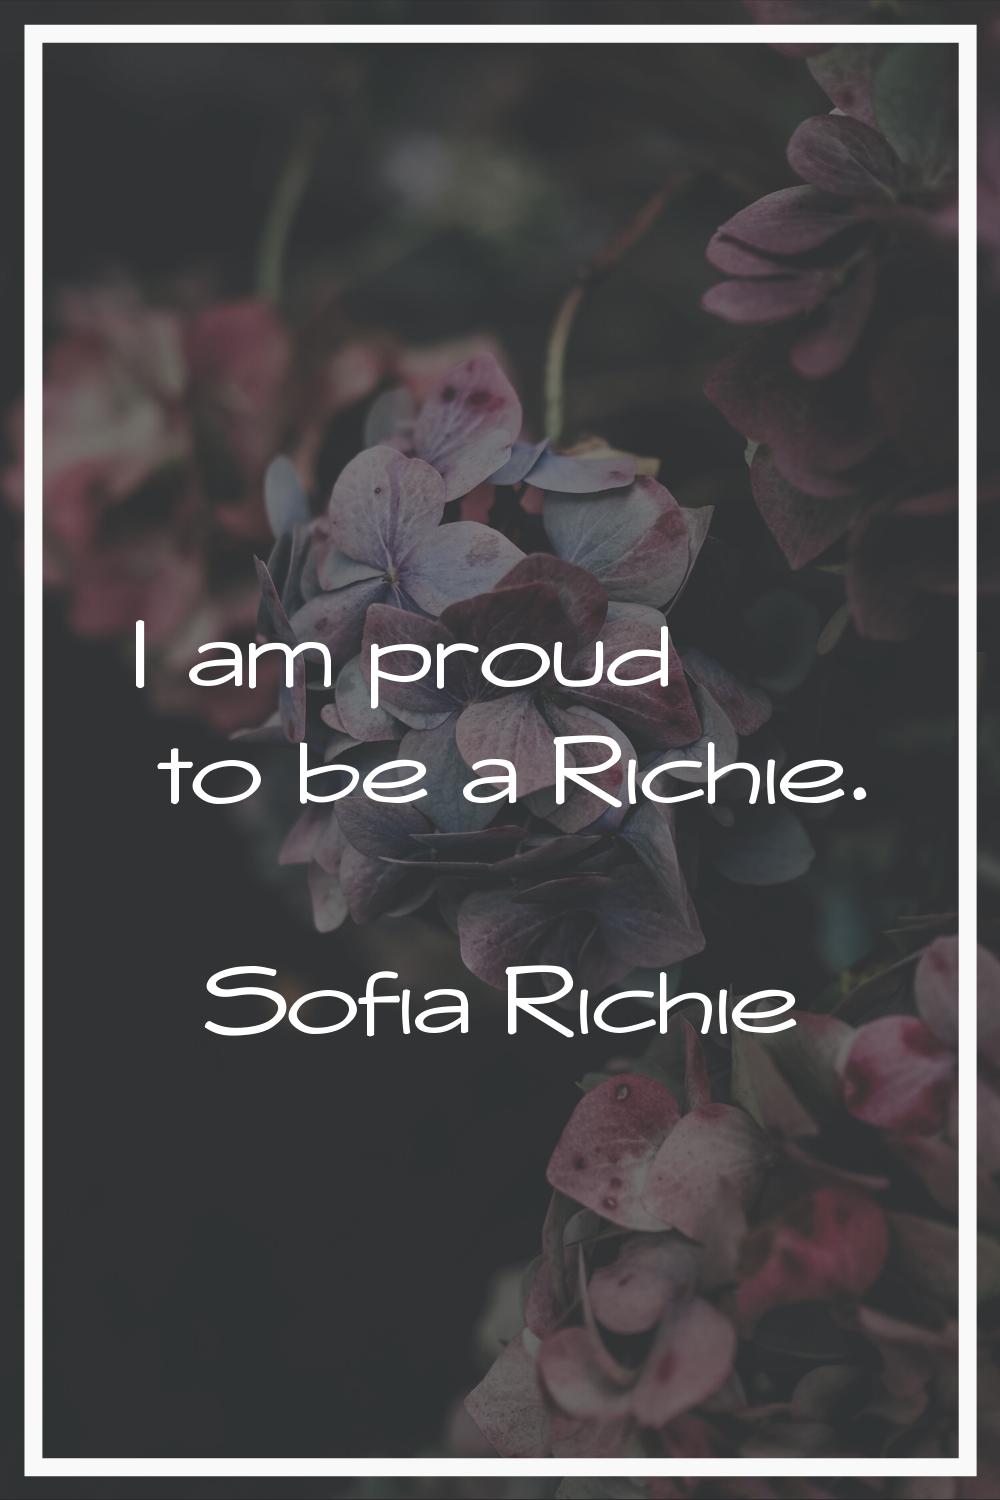 I am proud to be a Richie.